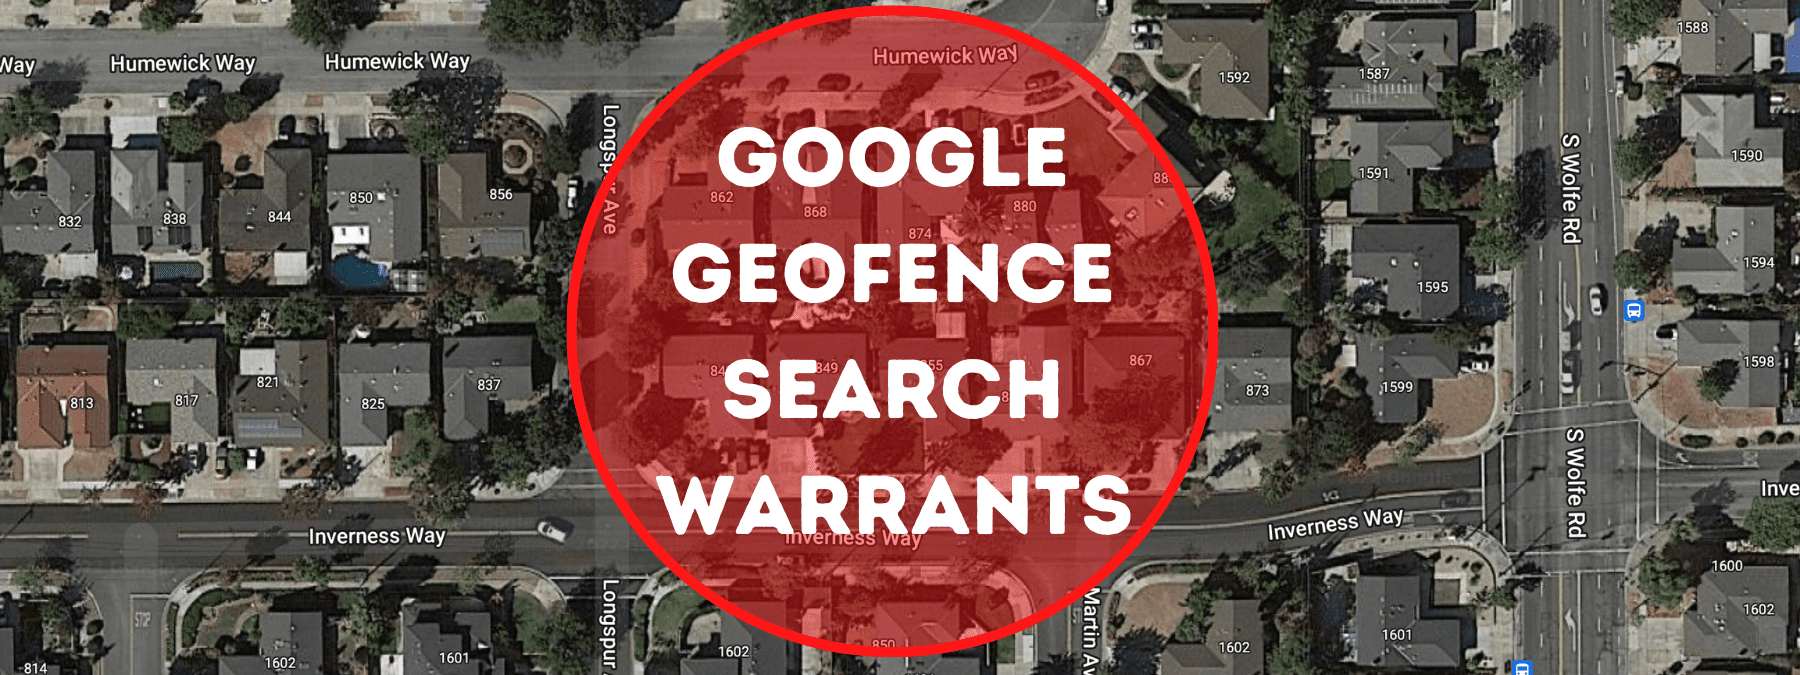 Featured image for “Writing Google Geofence Search Warrants”